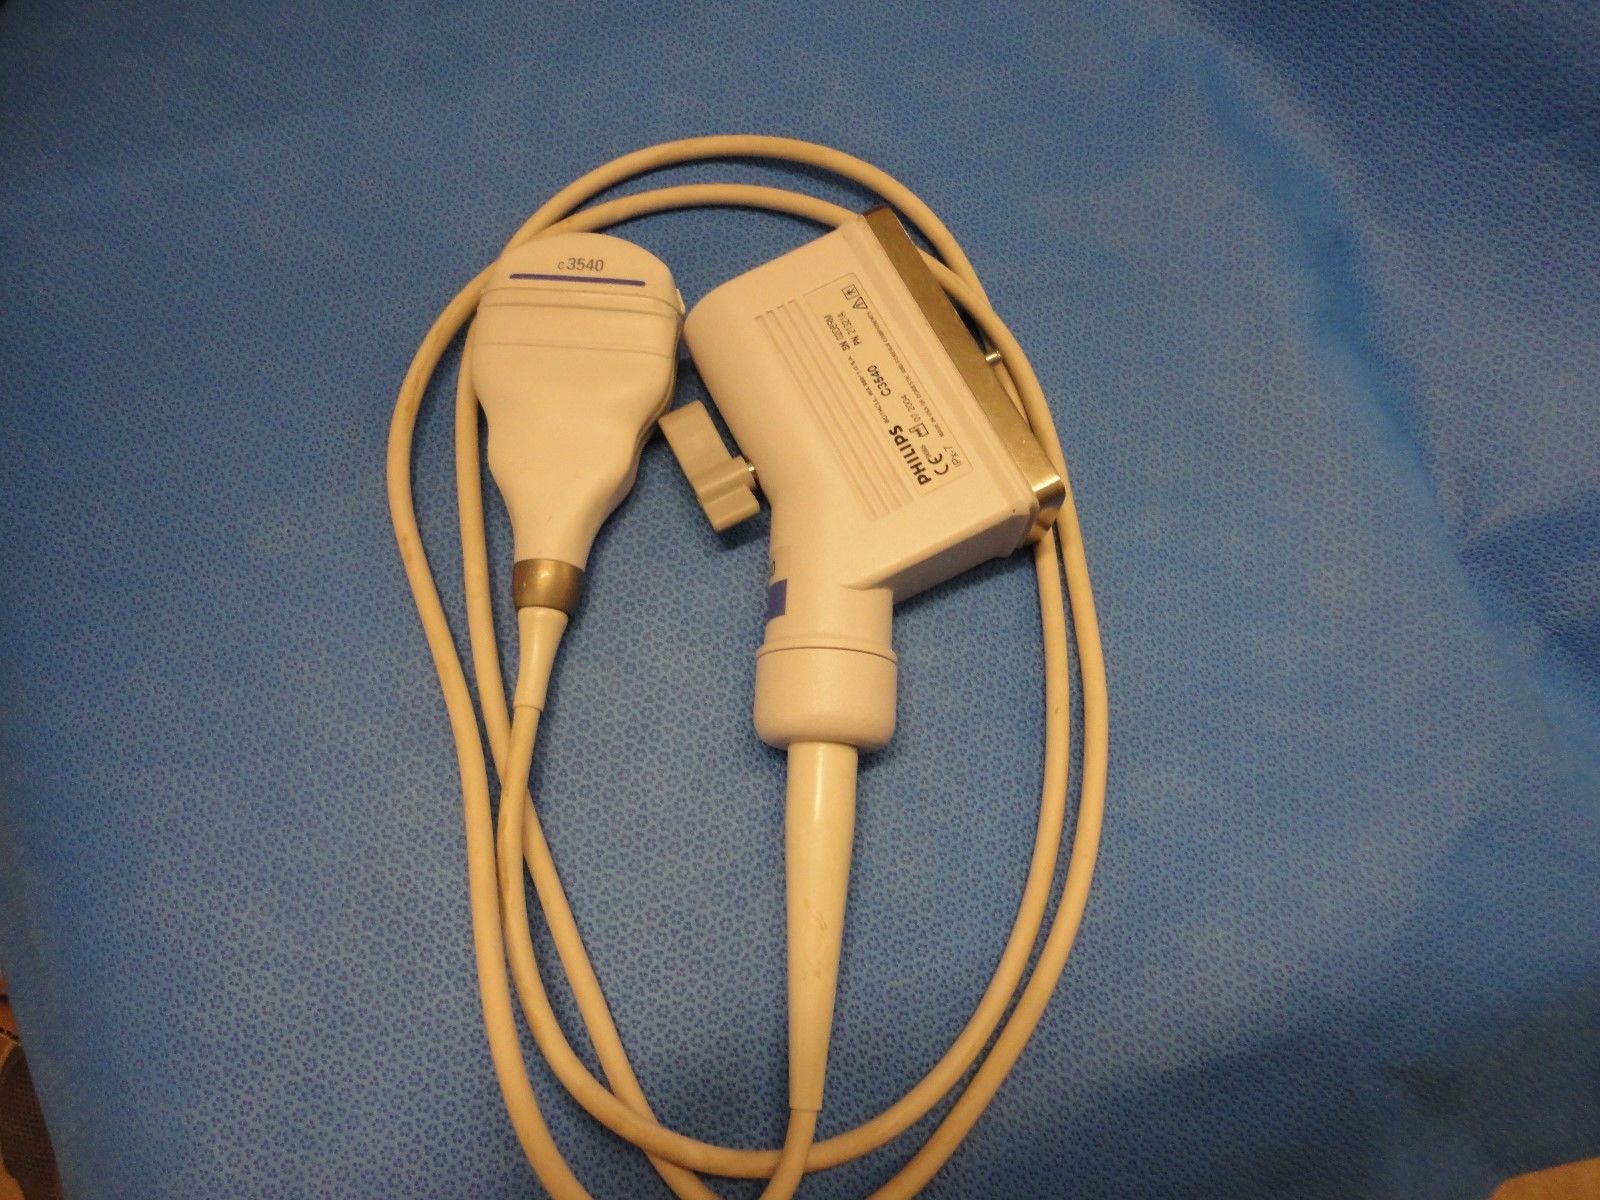 a couple of cords are plugged into a probe